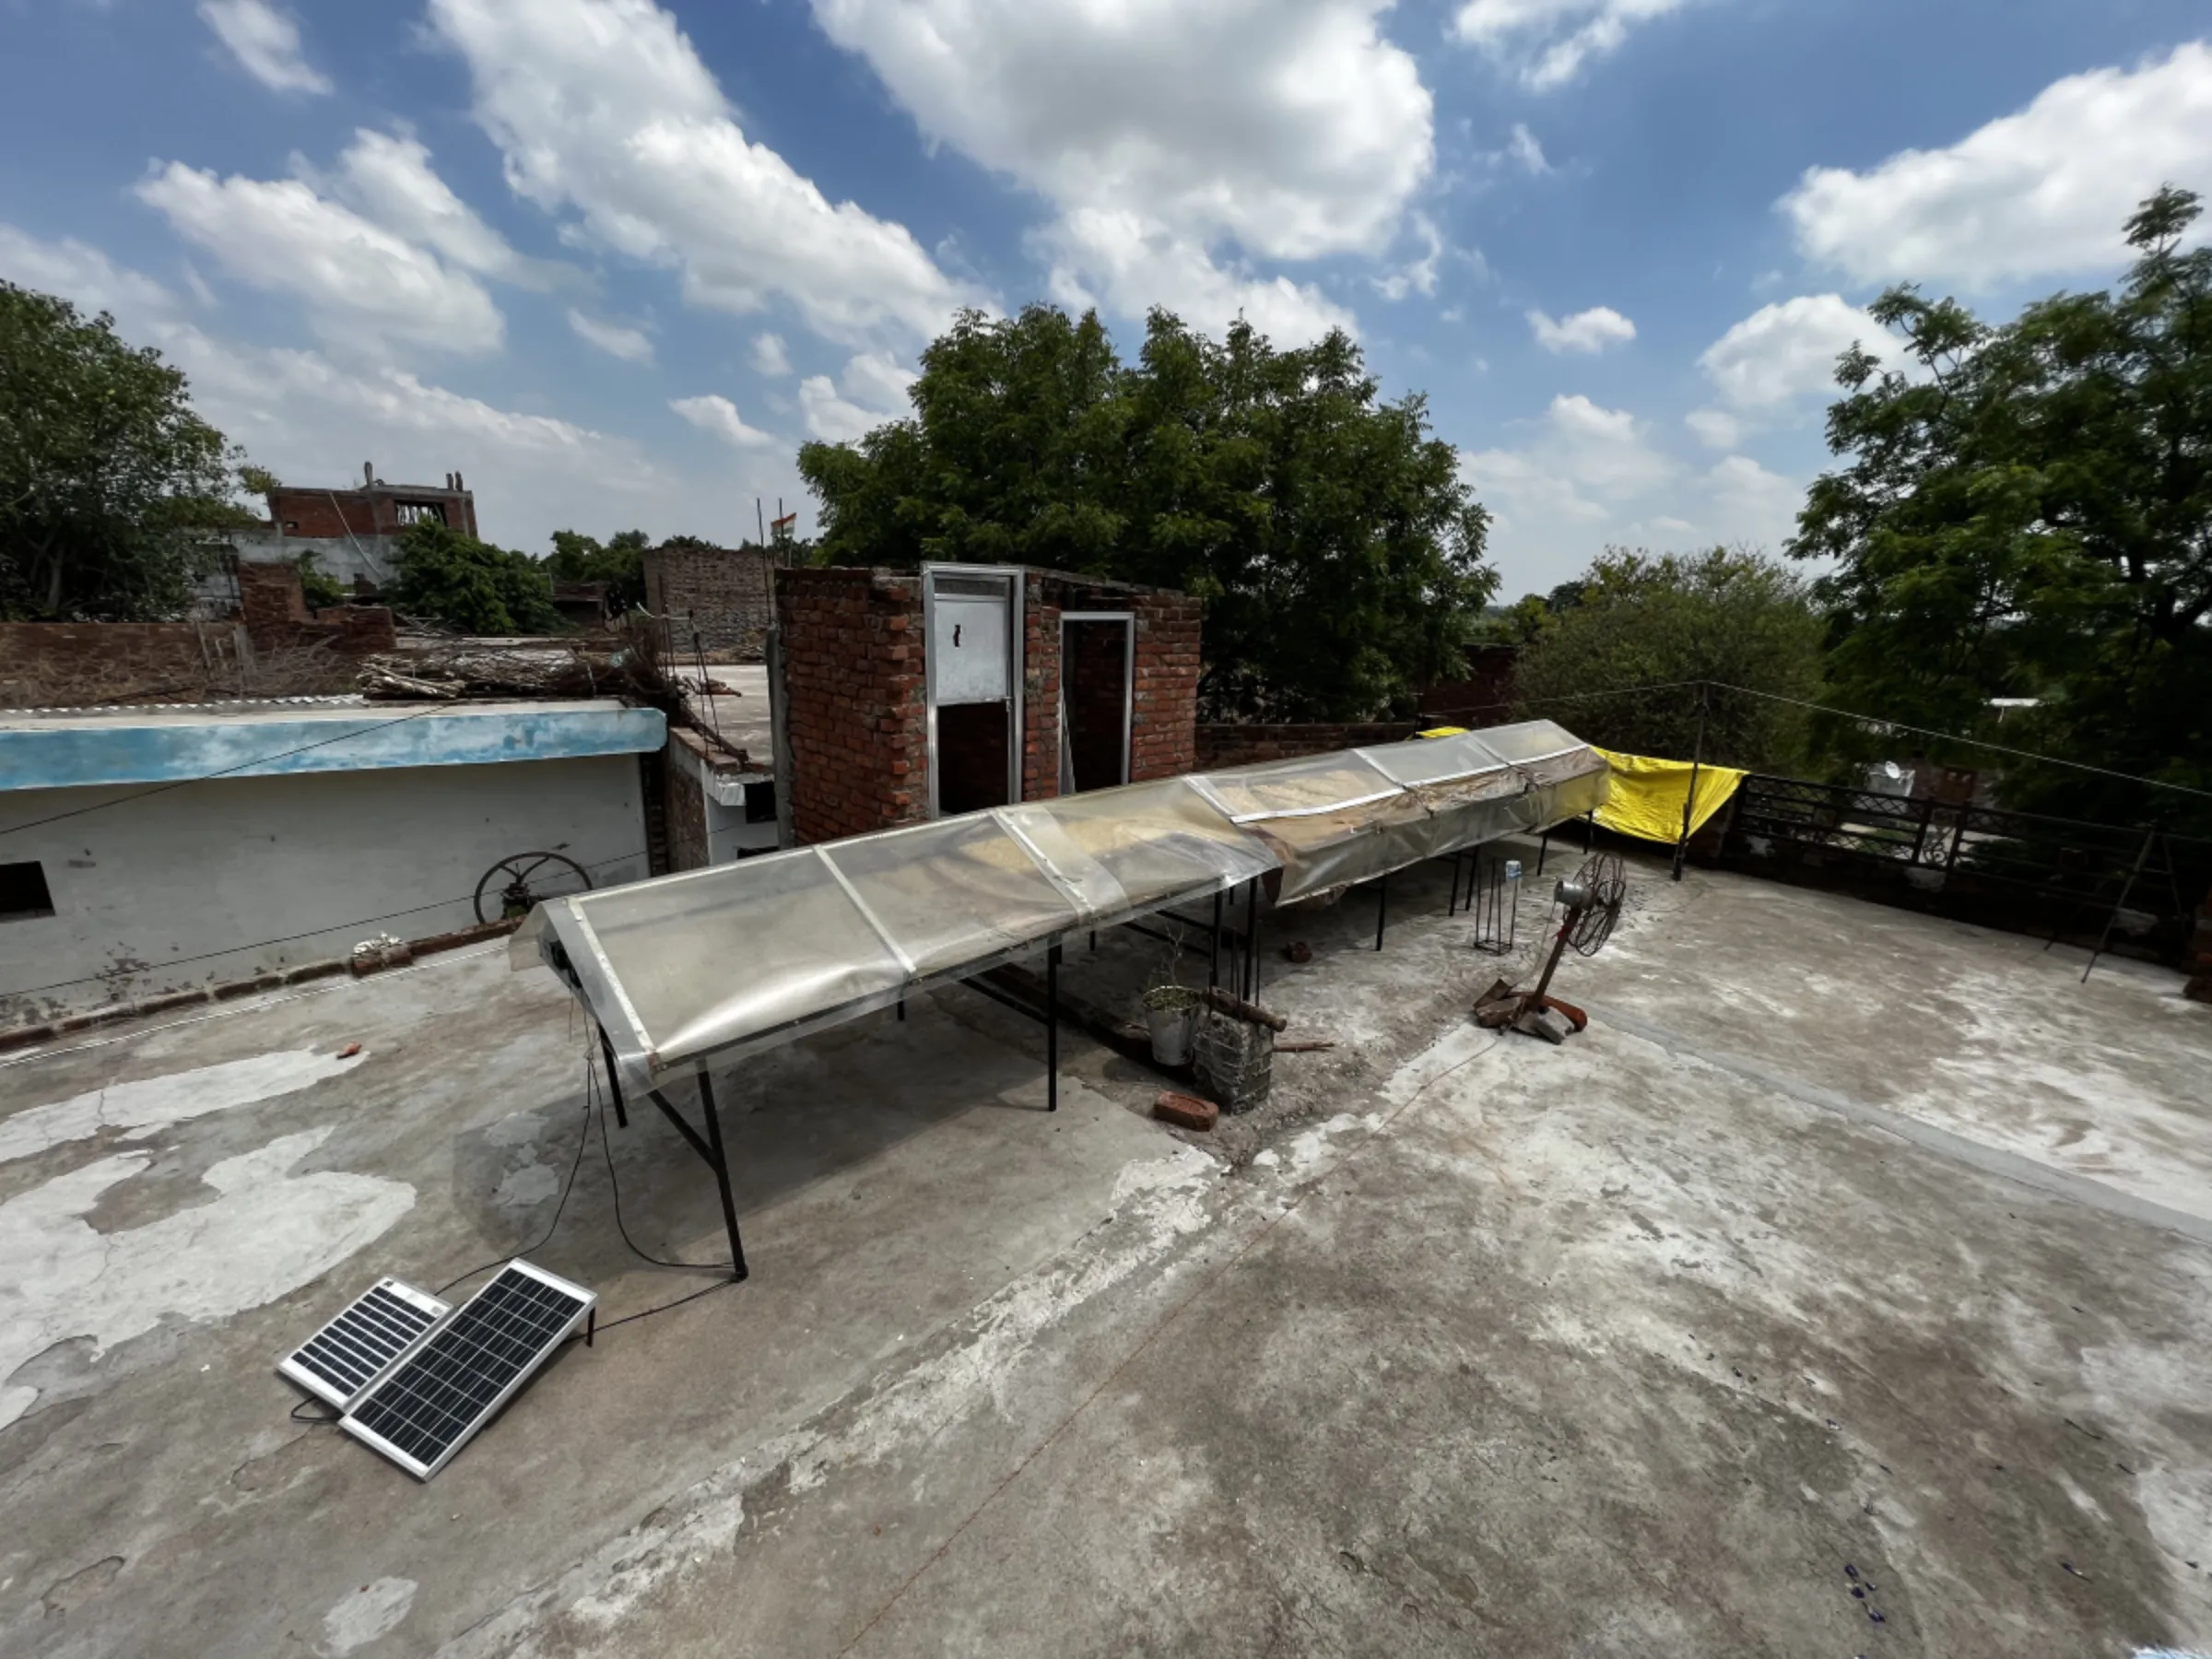 Shivraj Nishad has installed his solar dryer on the roof of his house in the village. Compared to open air drying the solar-powered appliance has halved drying time for flowers. Kanpur, India, June 27, 2023.Thomson Reuters Foundation/Bhasker Tripathi